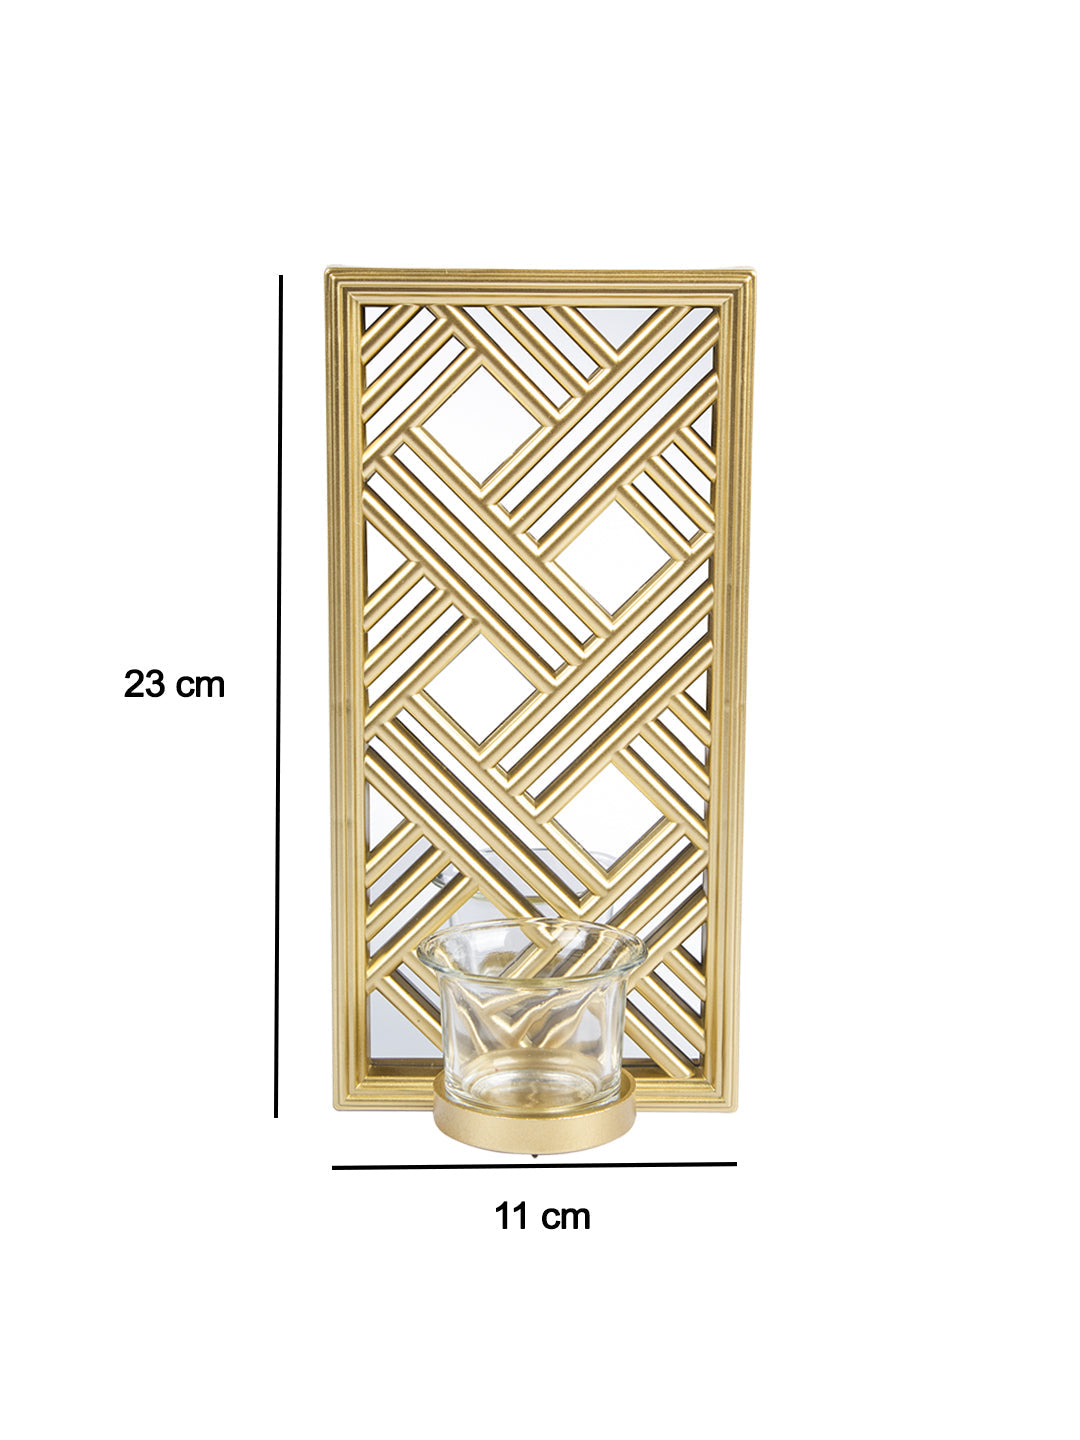 VON CASA Decorative Indoor Wall Sconce Candle Holders